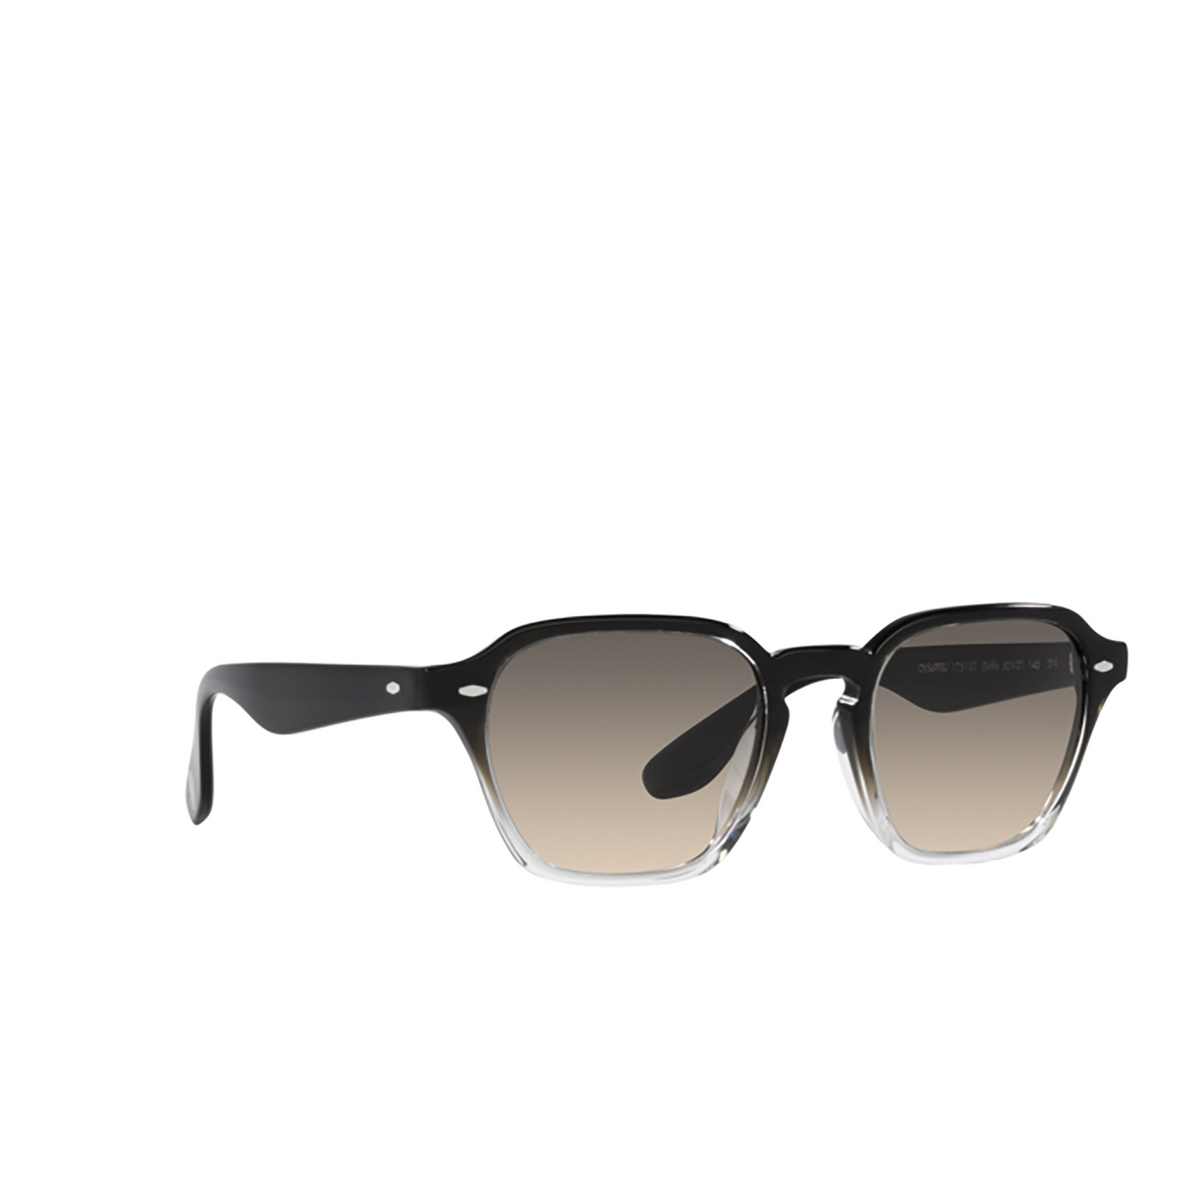 Oliver Peoples GRIFFO Sunglasses 175132 Dark military / Crystal gradient - three-quarters view